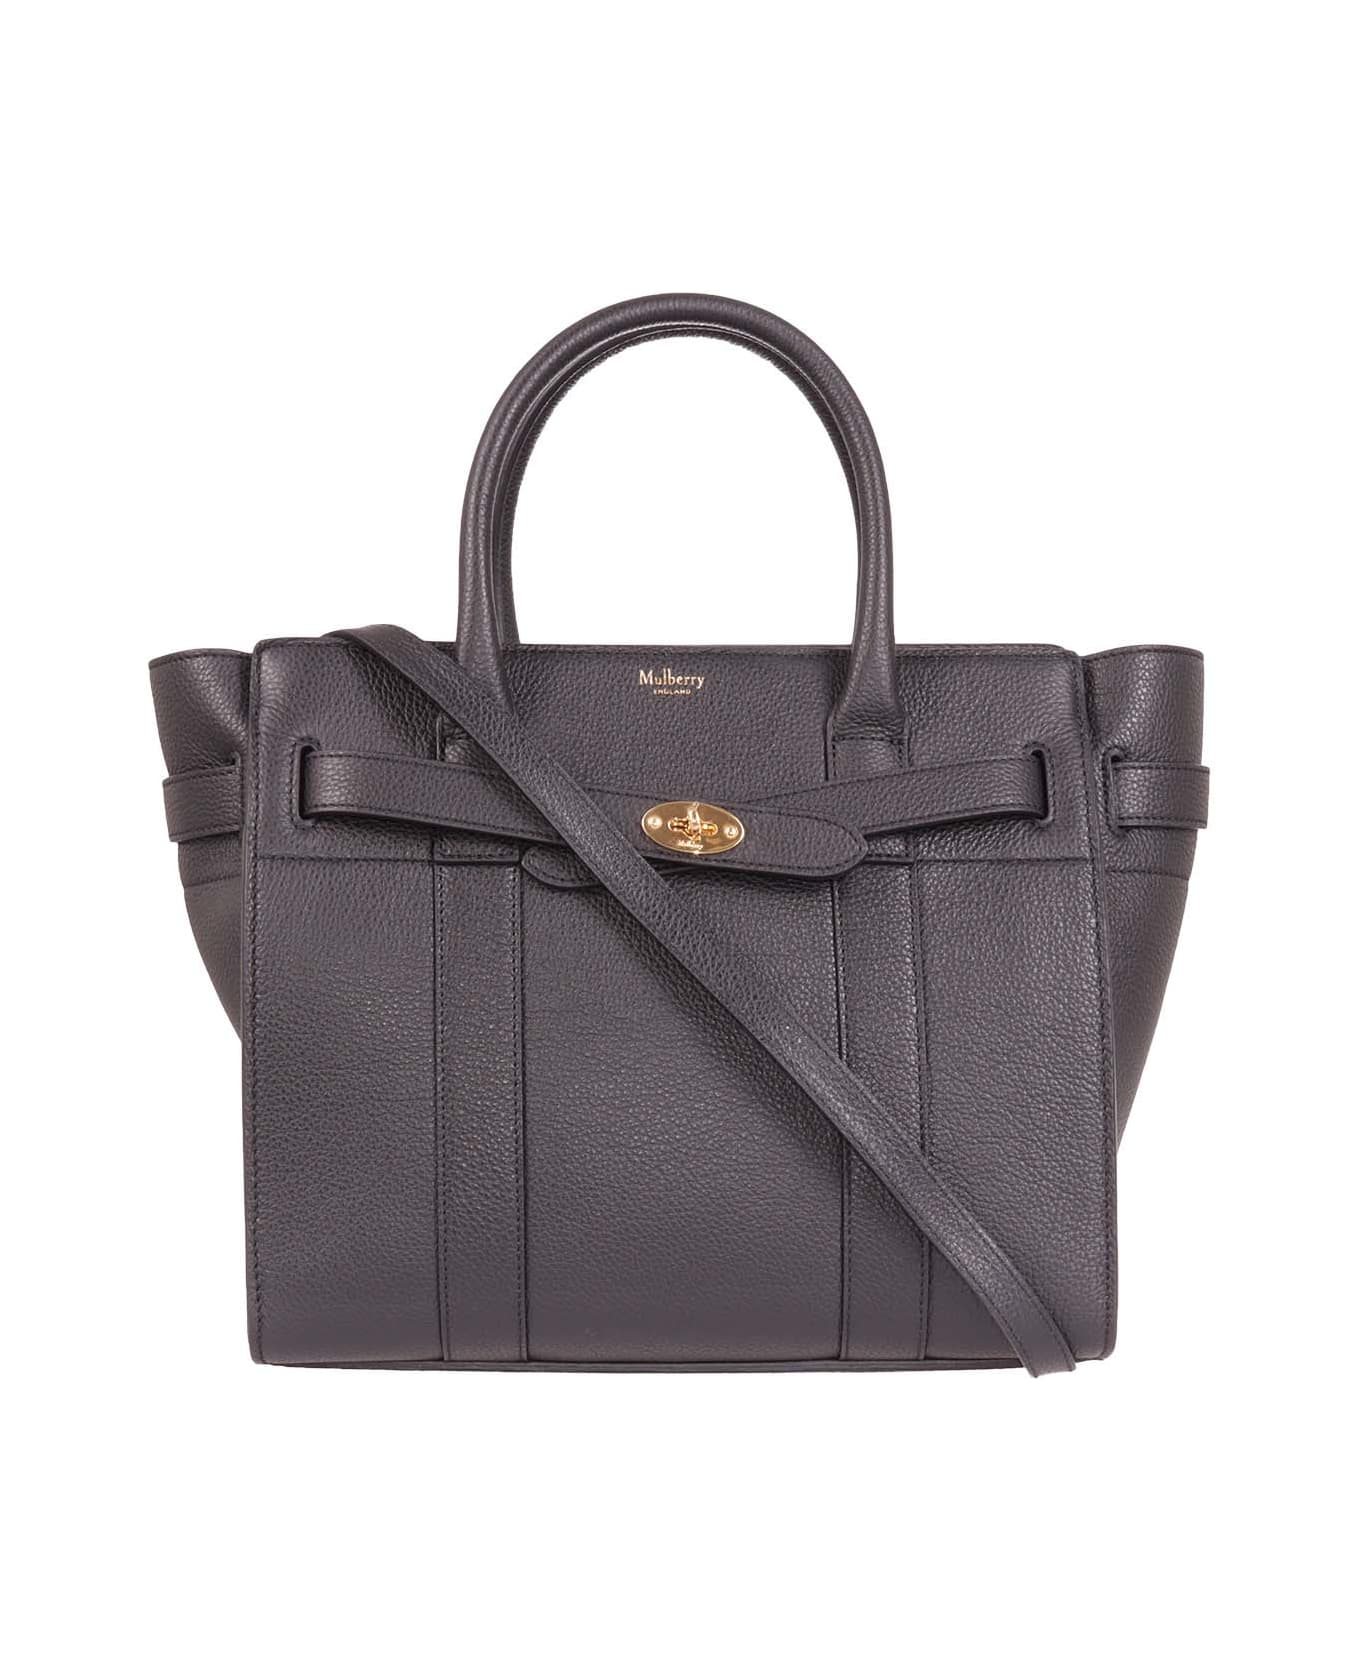 Mulberry Small Zipped Bayswater - Black